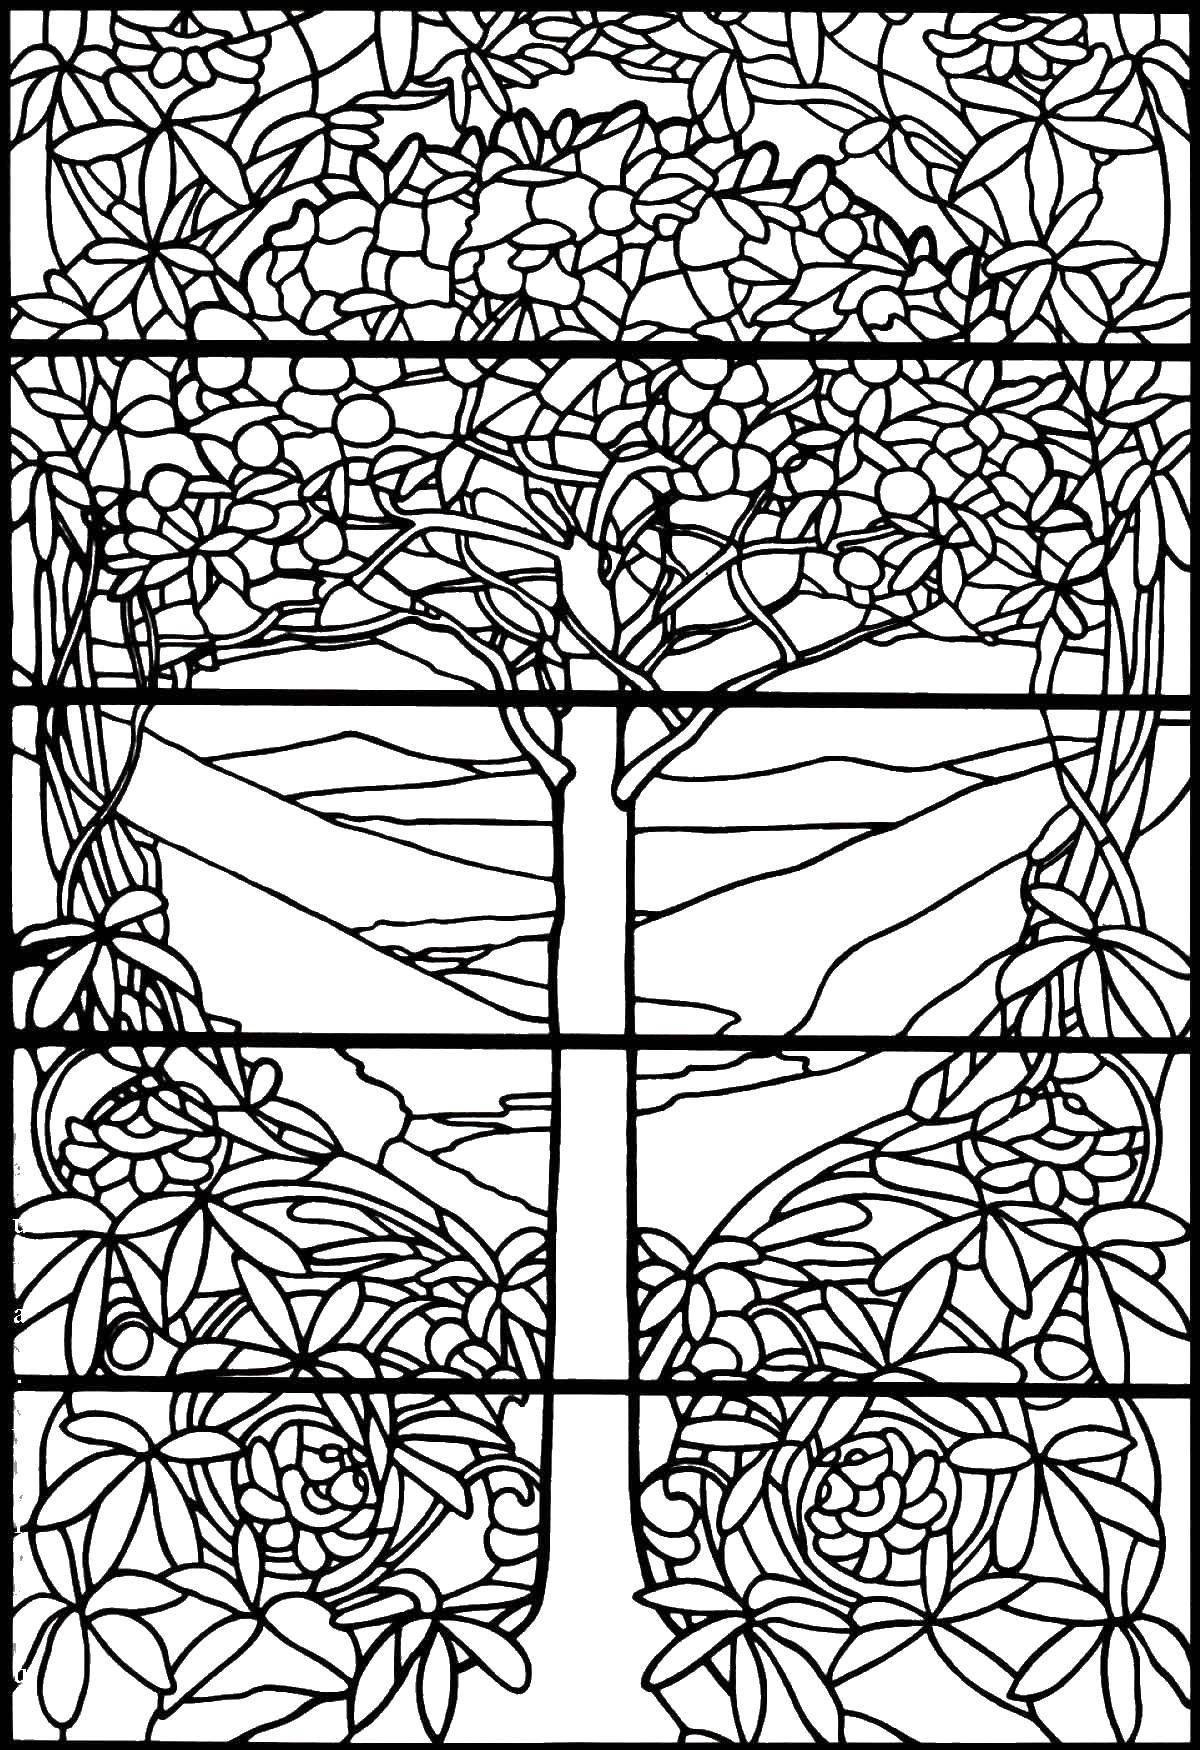 Coloring Tree. Category stained glass. Tags:  stained glass, wood.